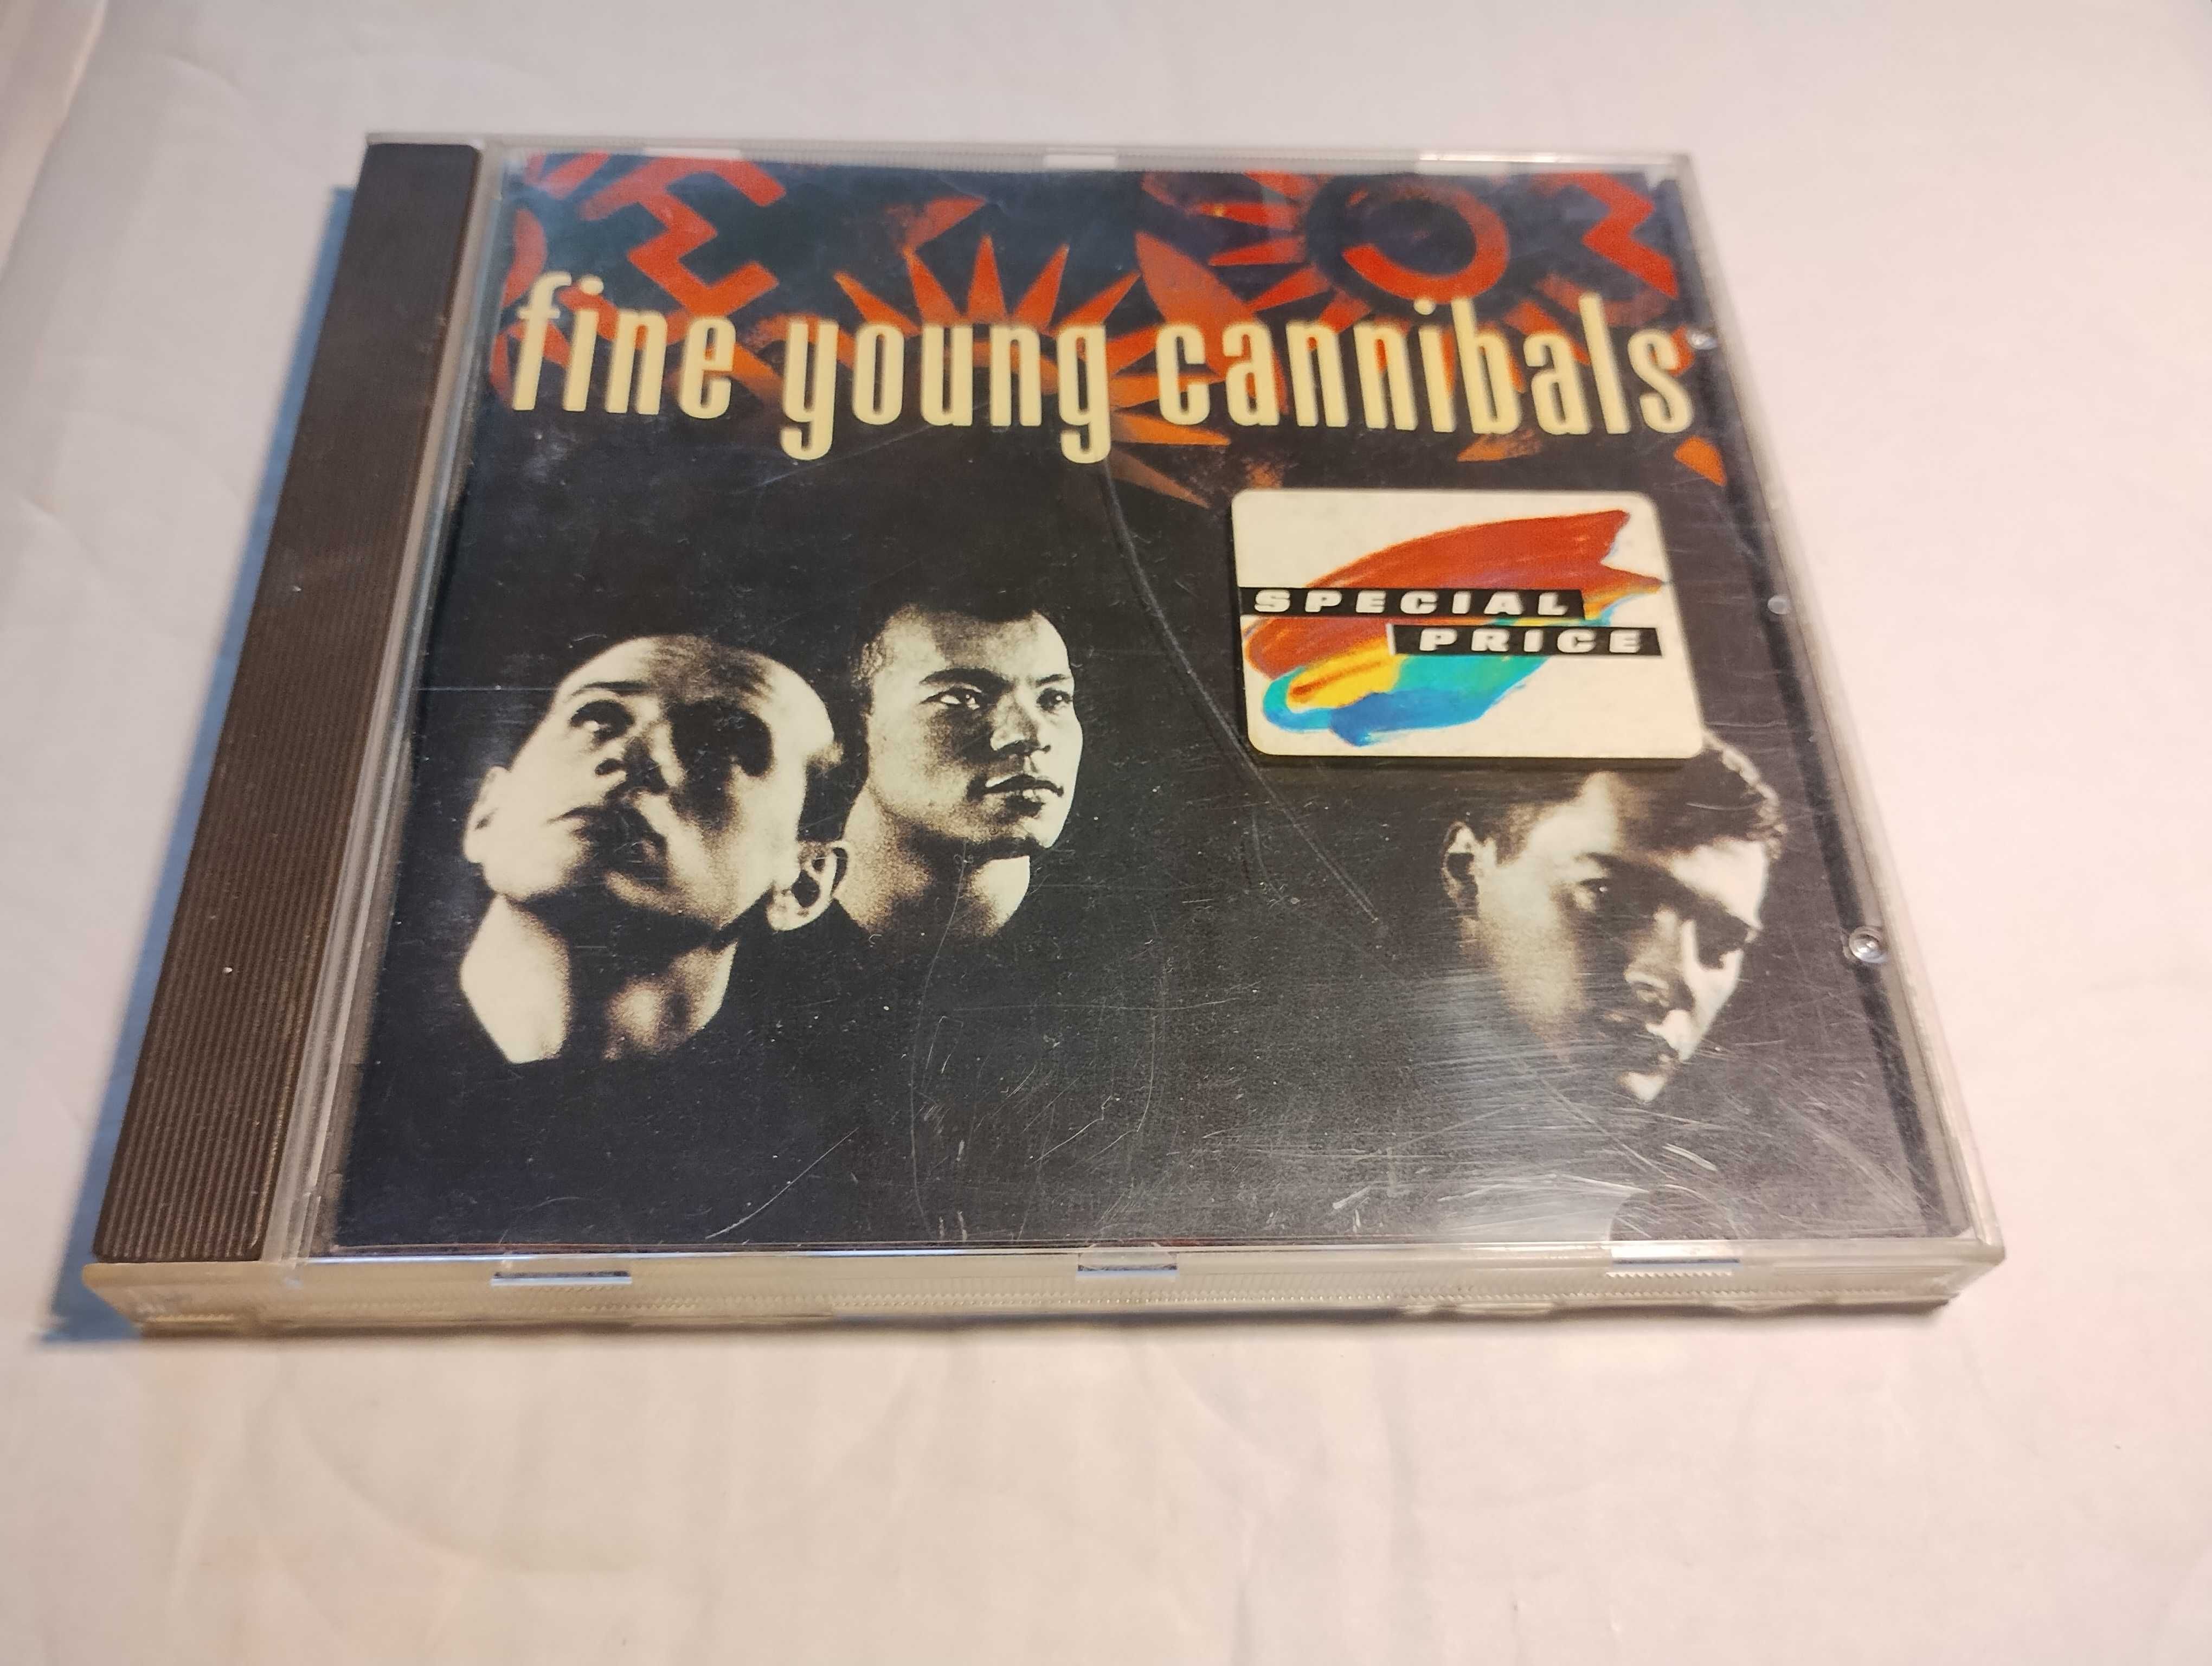 Fine young cannibals CD